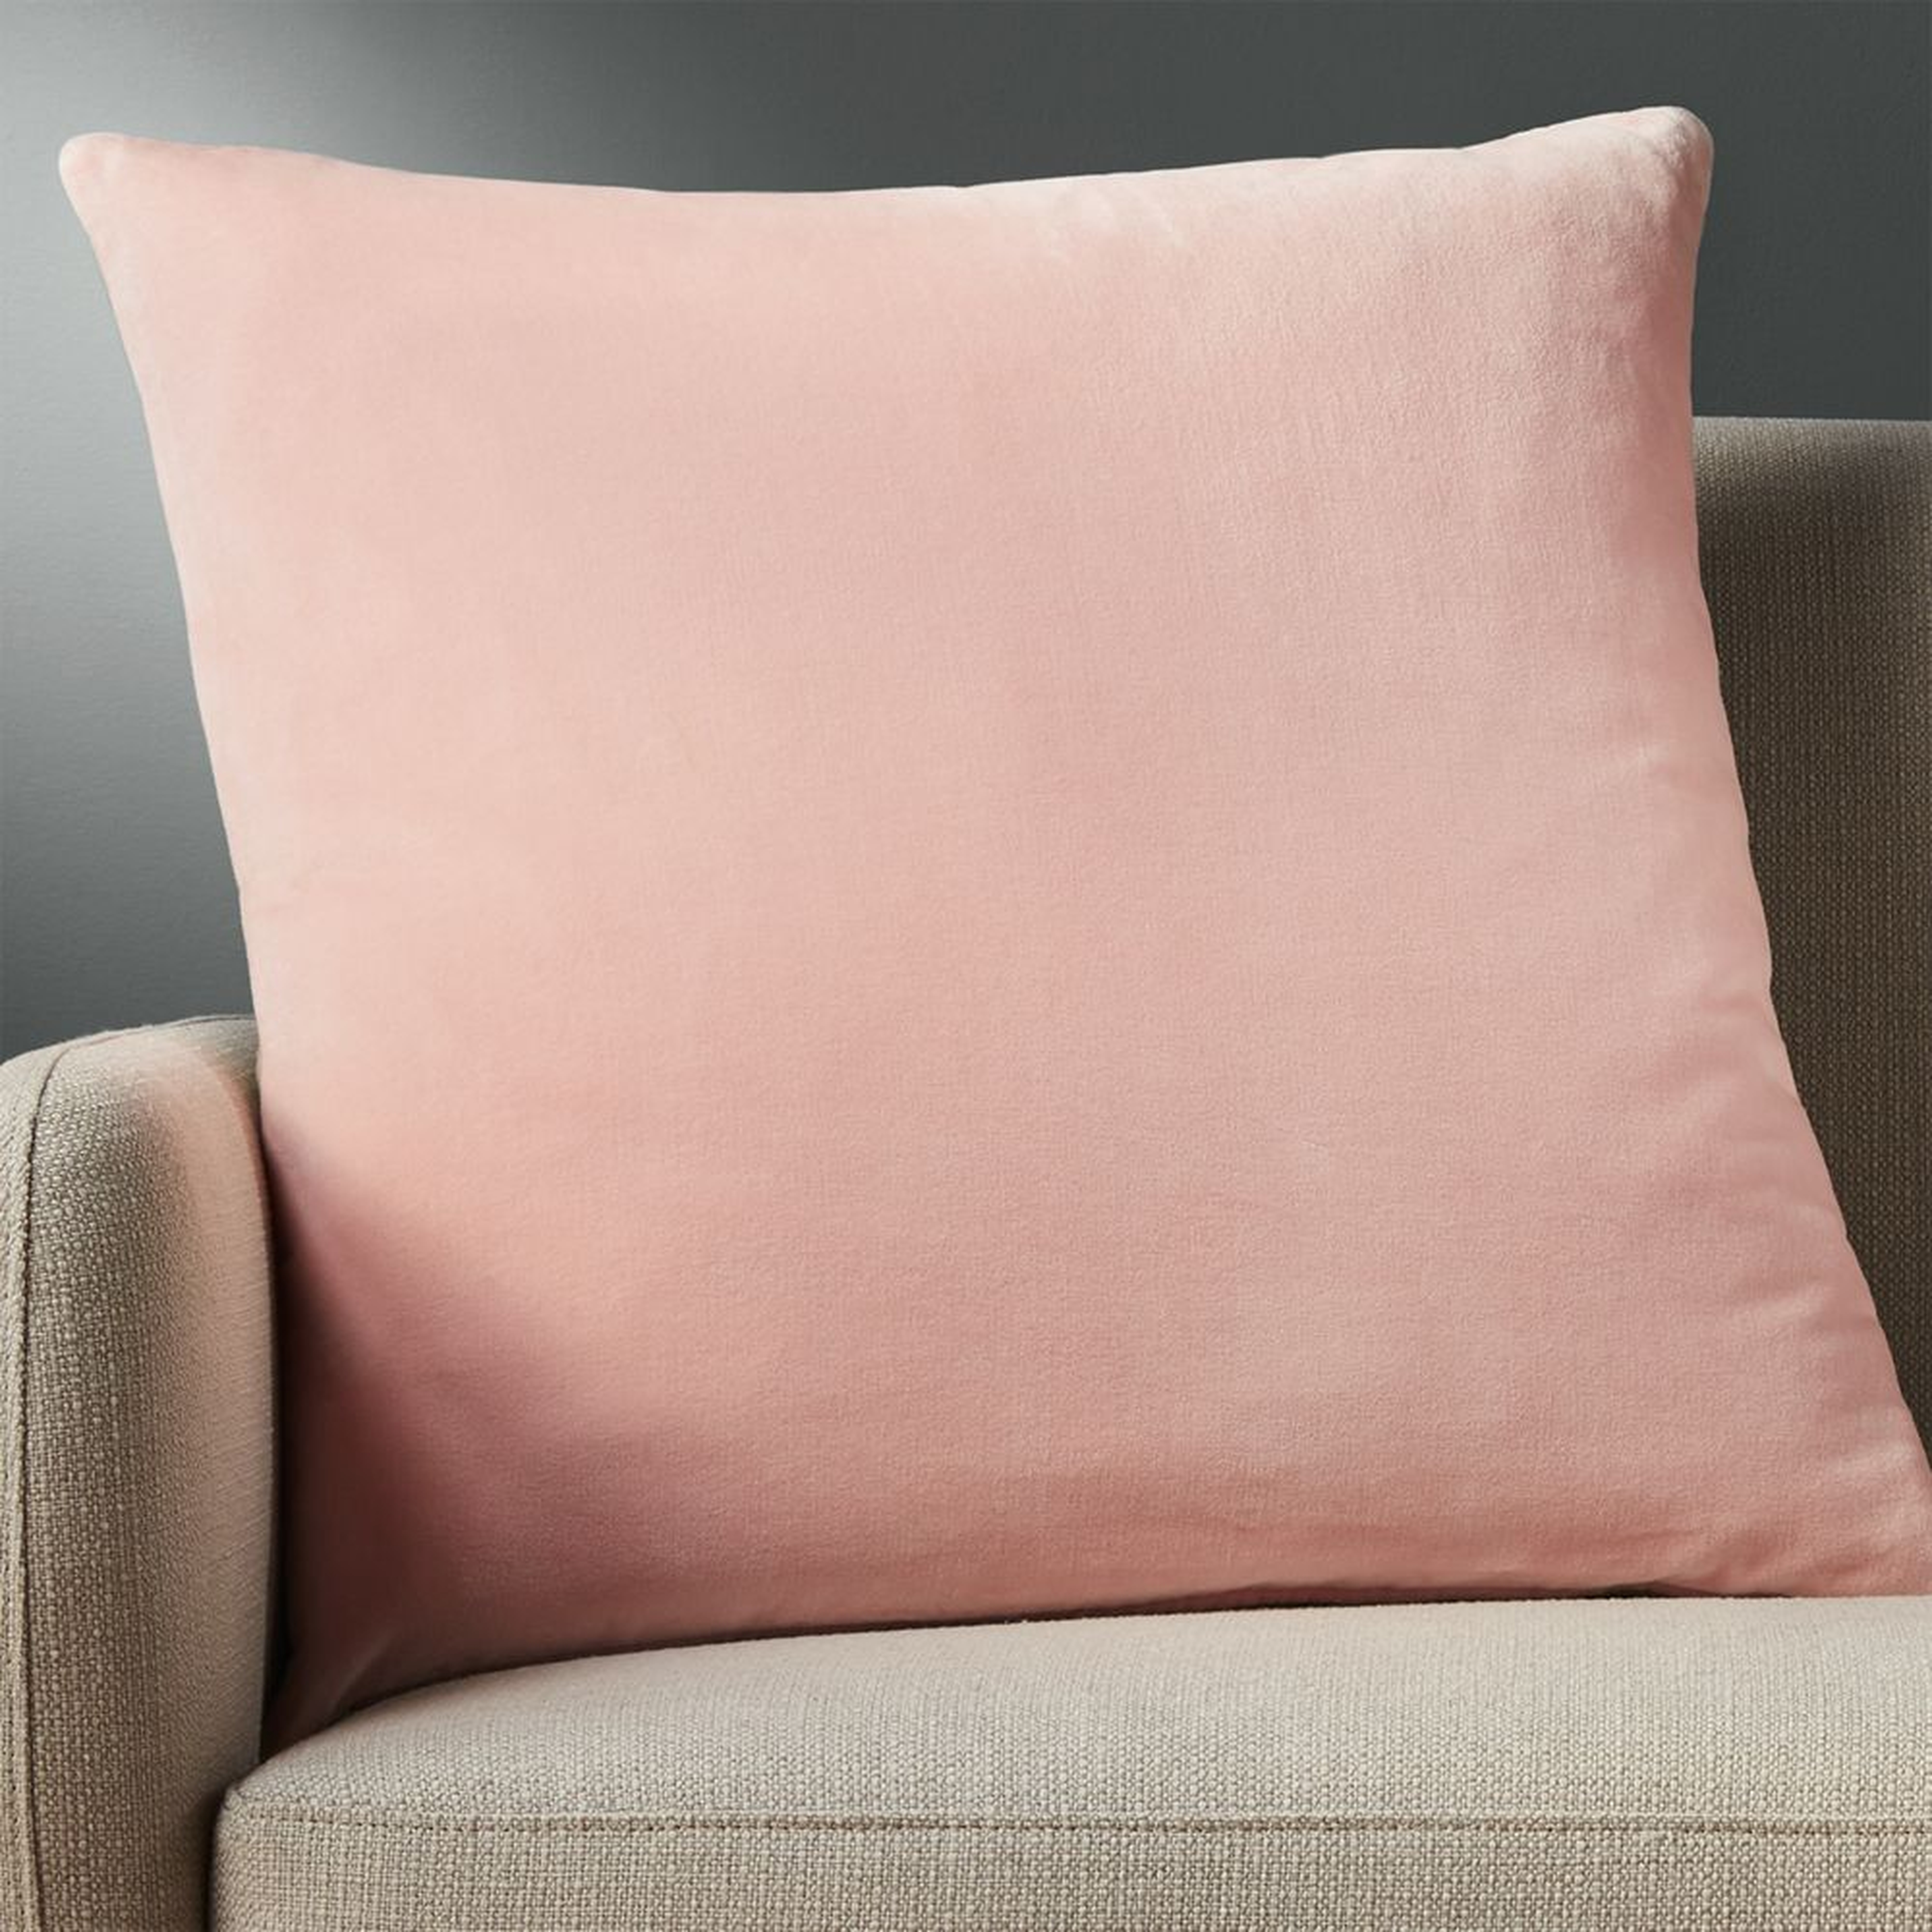 23" leisure blush pillow with feather-down insert - CB2